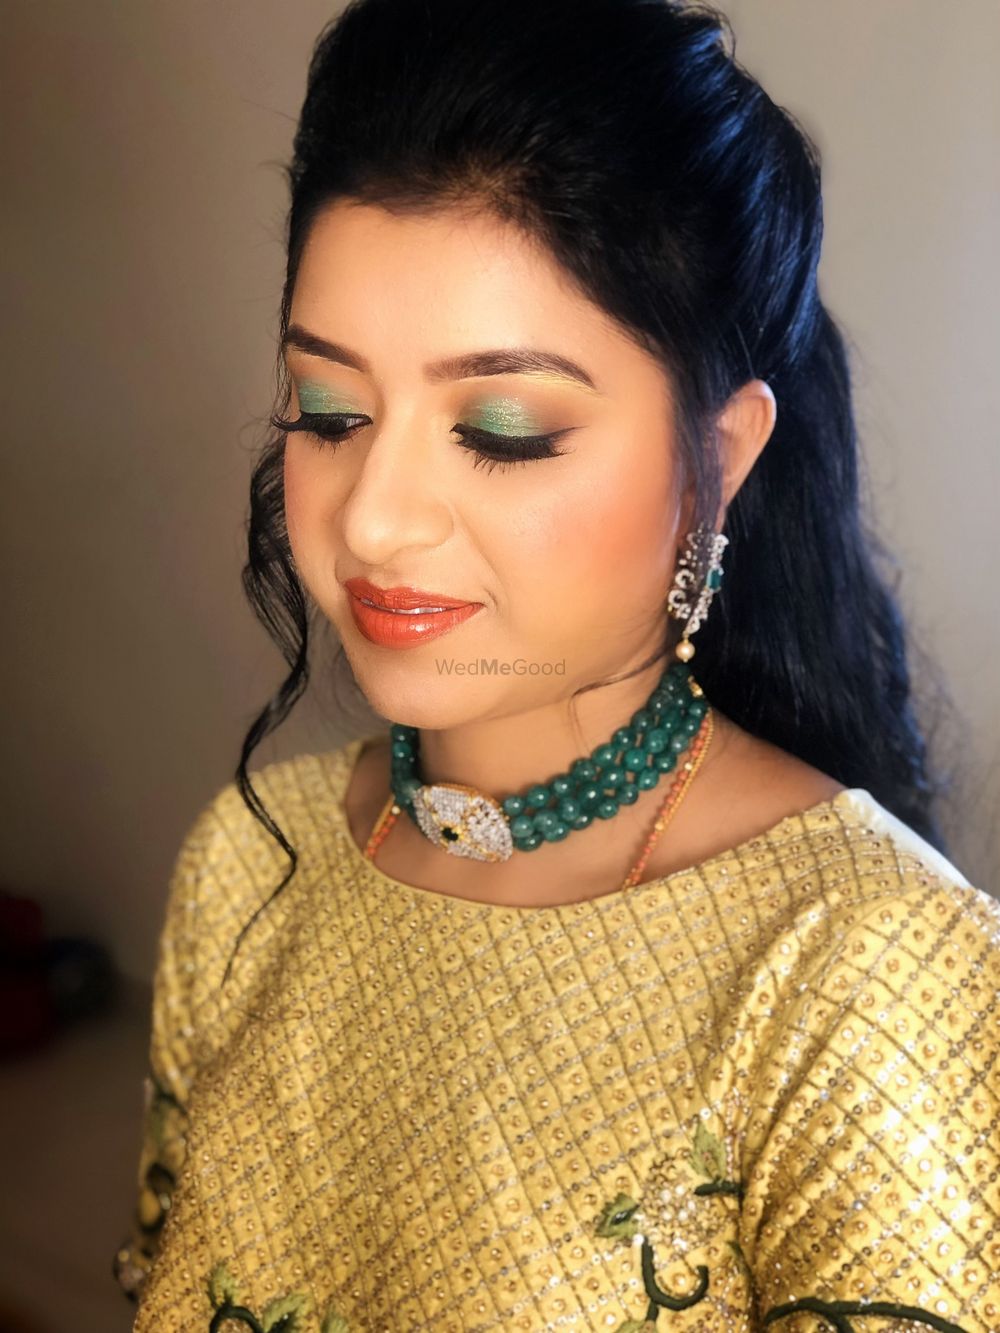 Photo From Sangeet  - By Makeover by Sonal